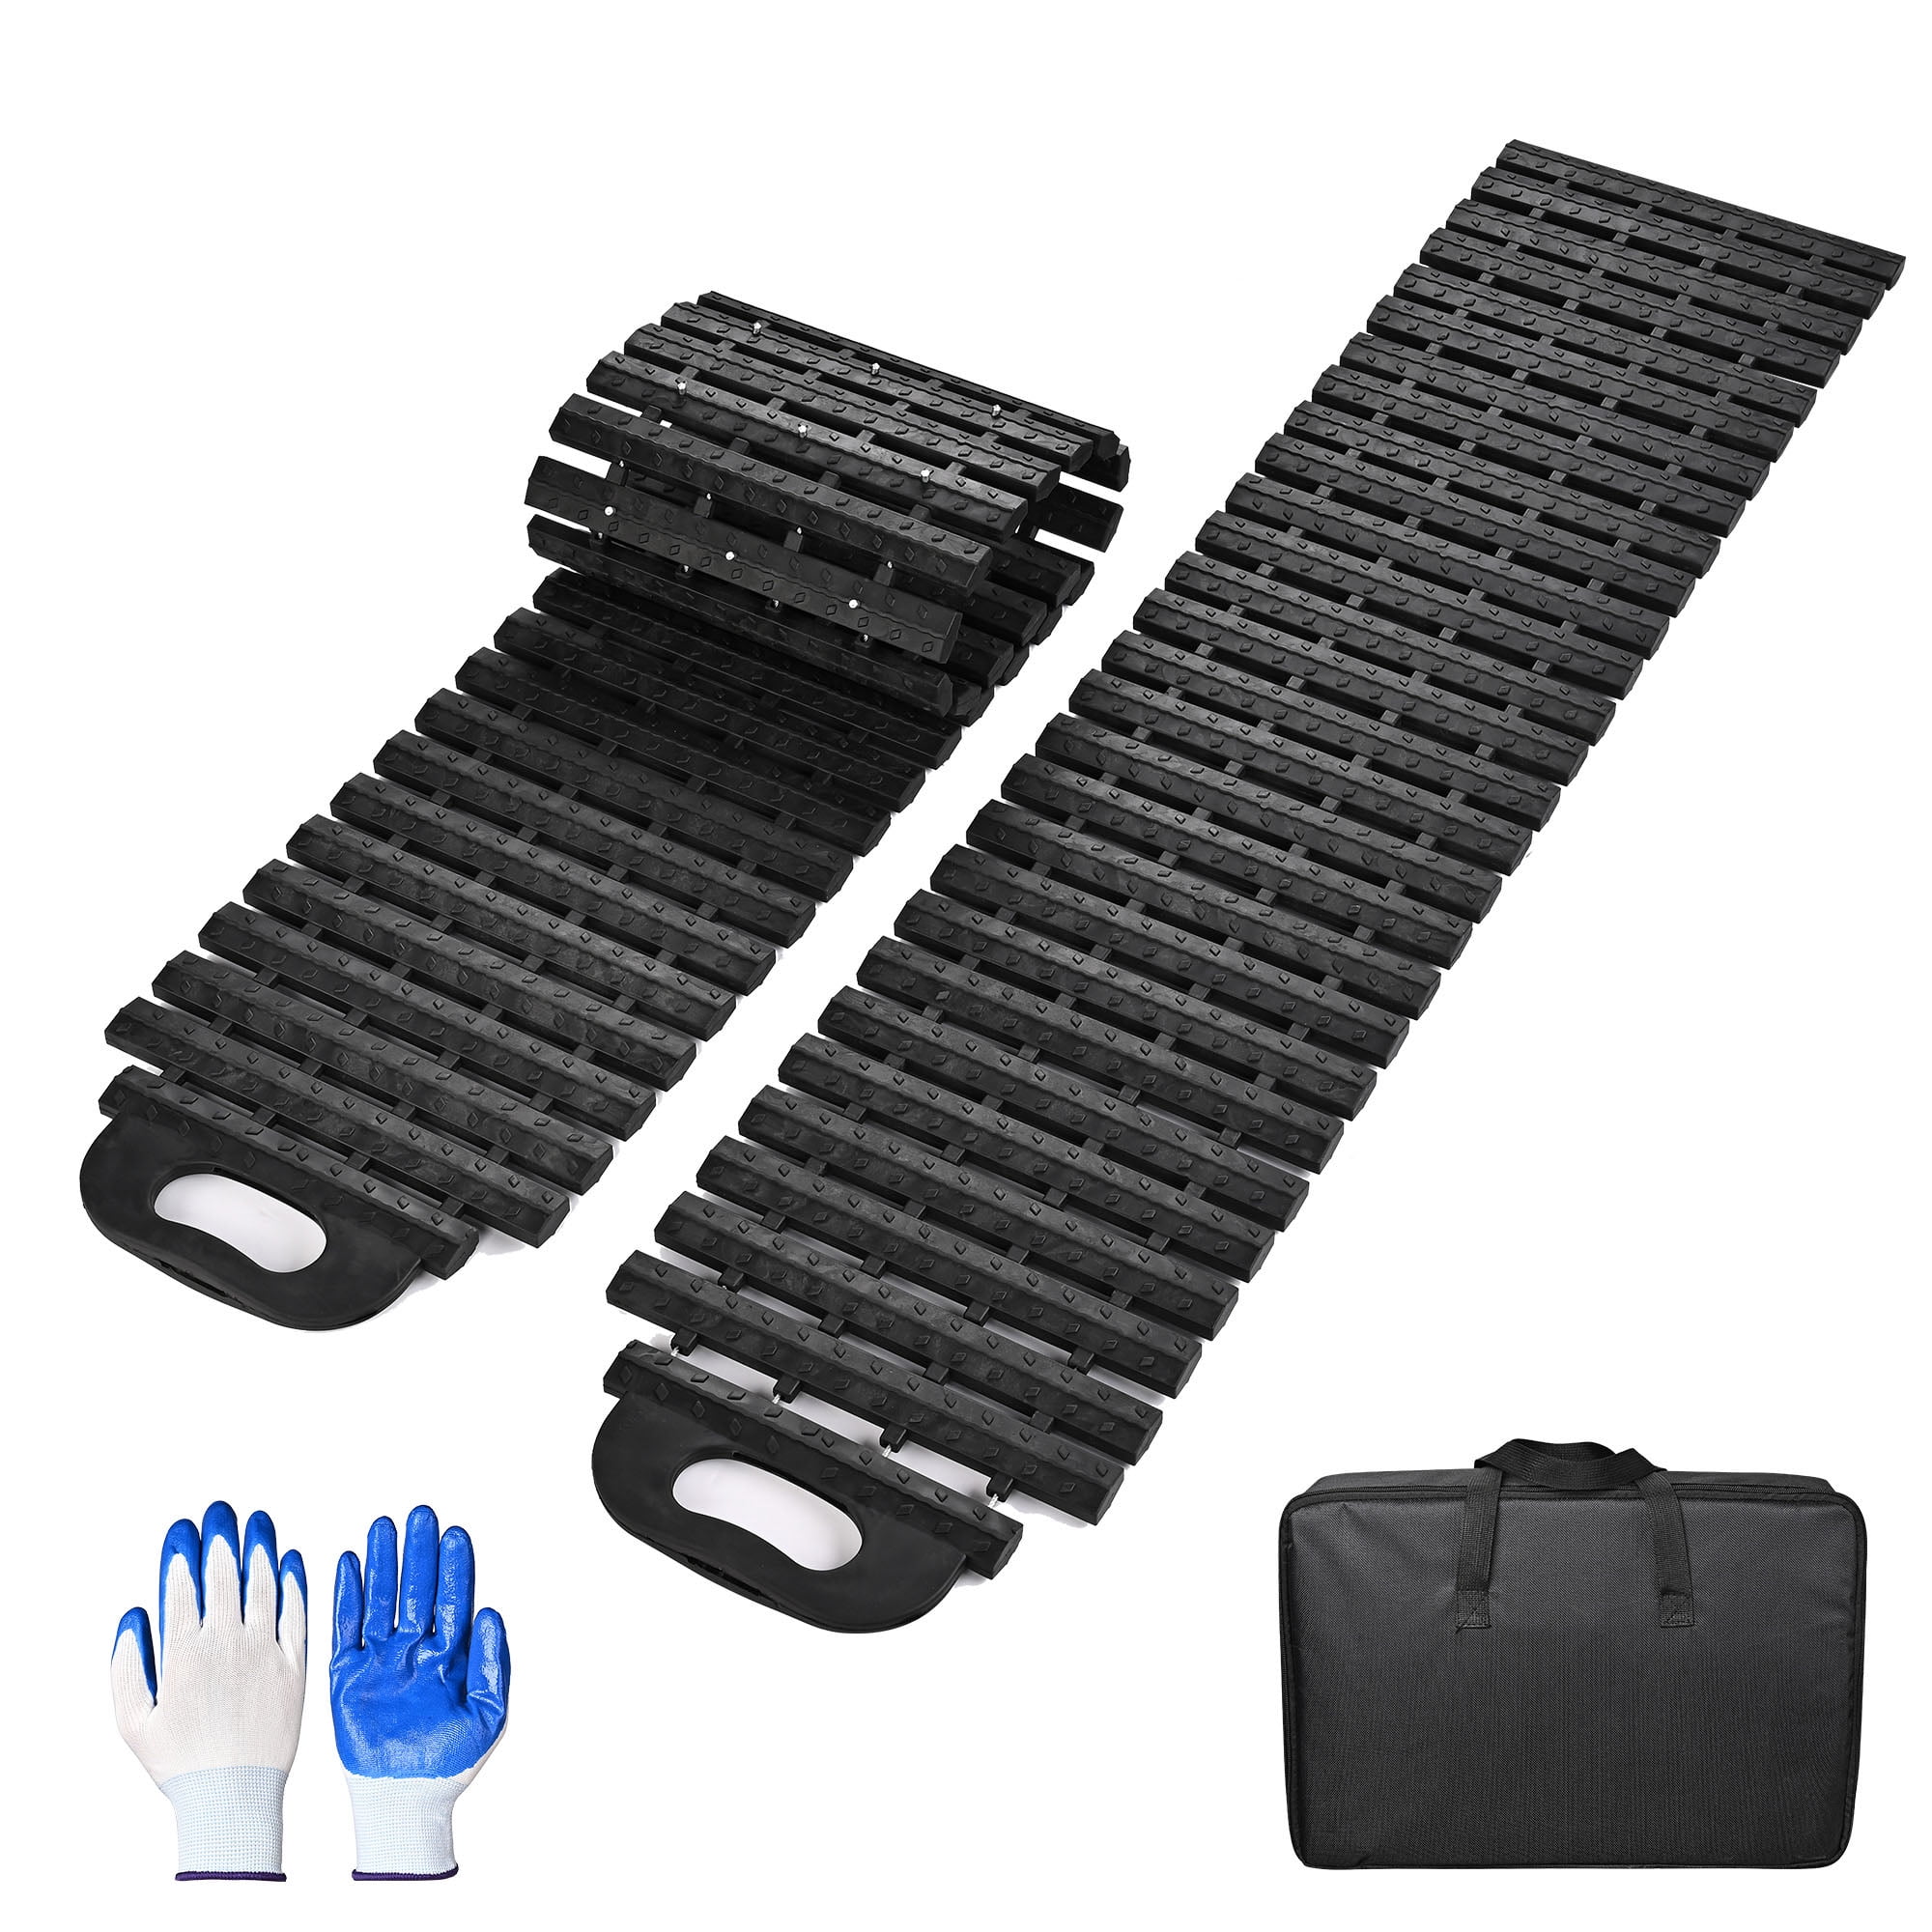 Yescom 47x11 Tire Traction Mats Emergency Recovery Track for Car